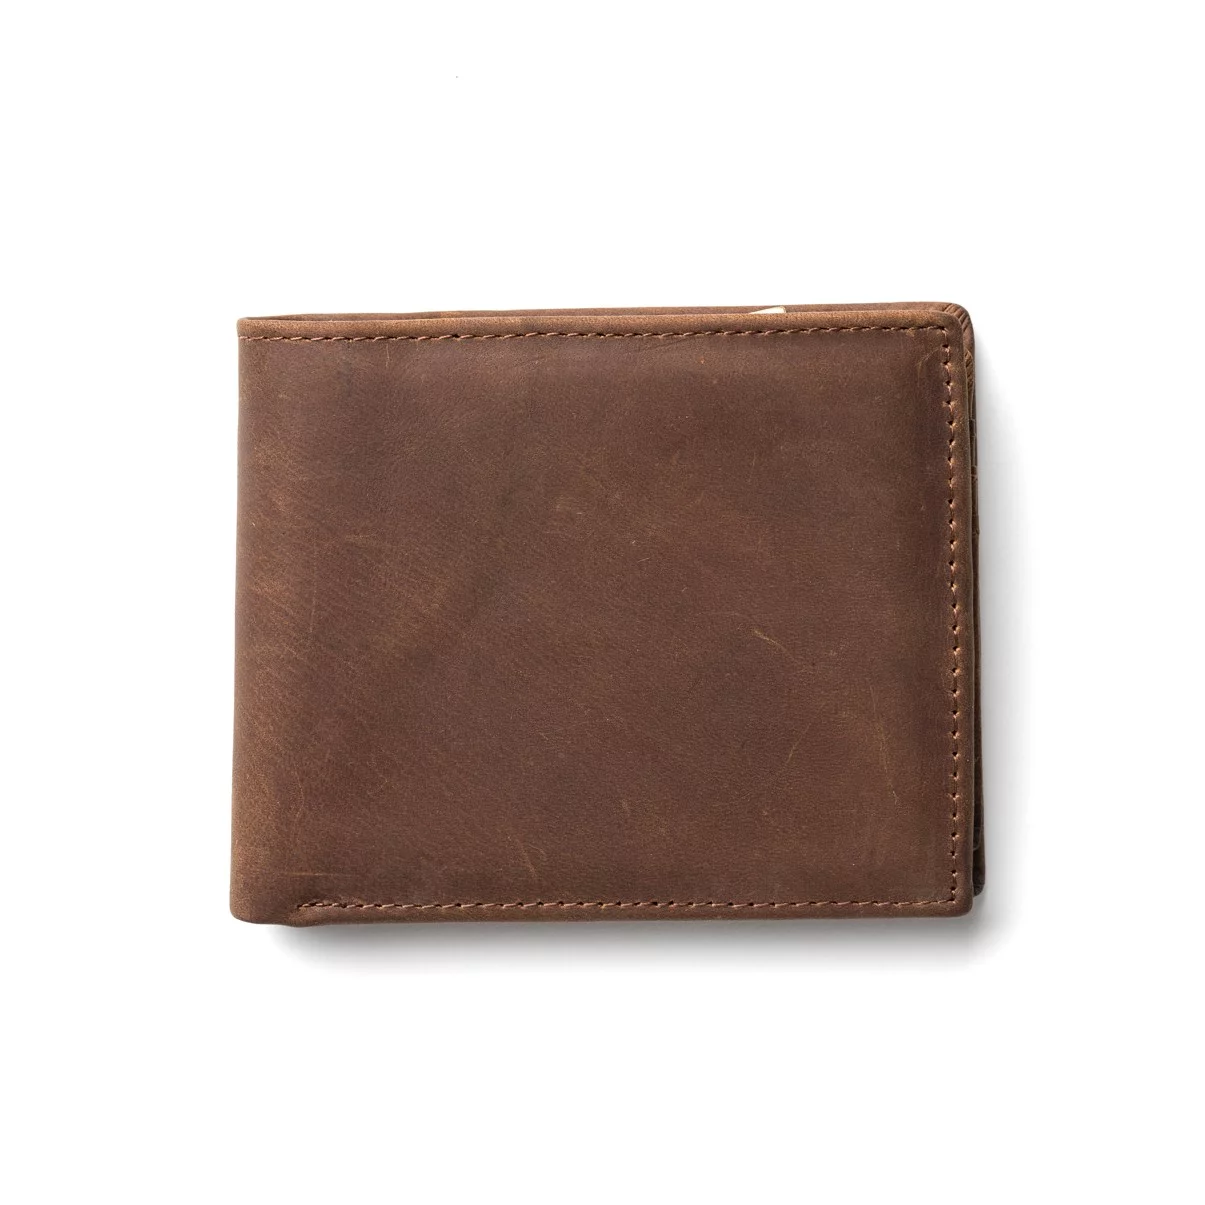 Portefeuille Fullhardy Brown D700 (Brown)